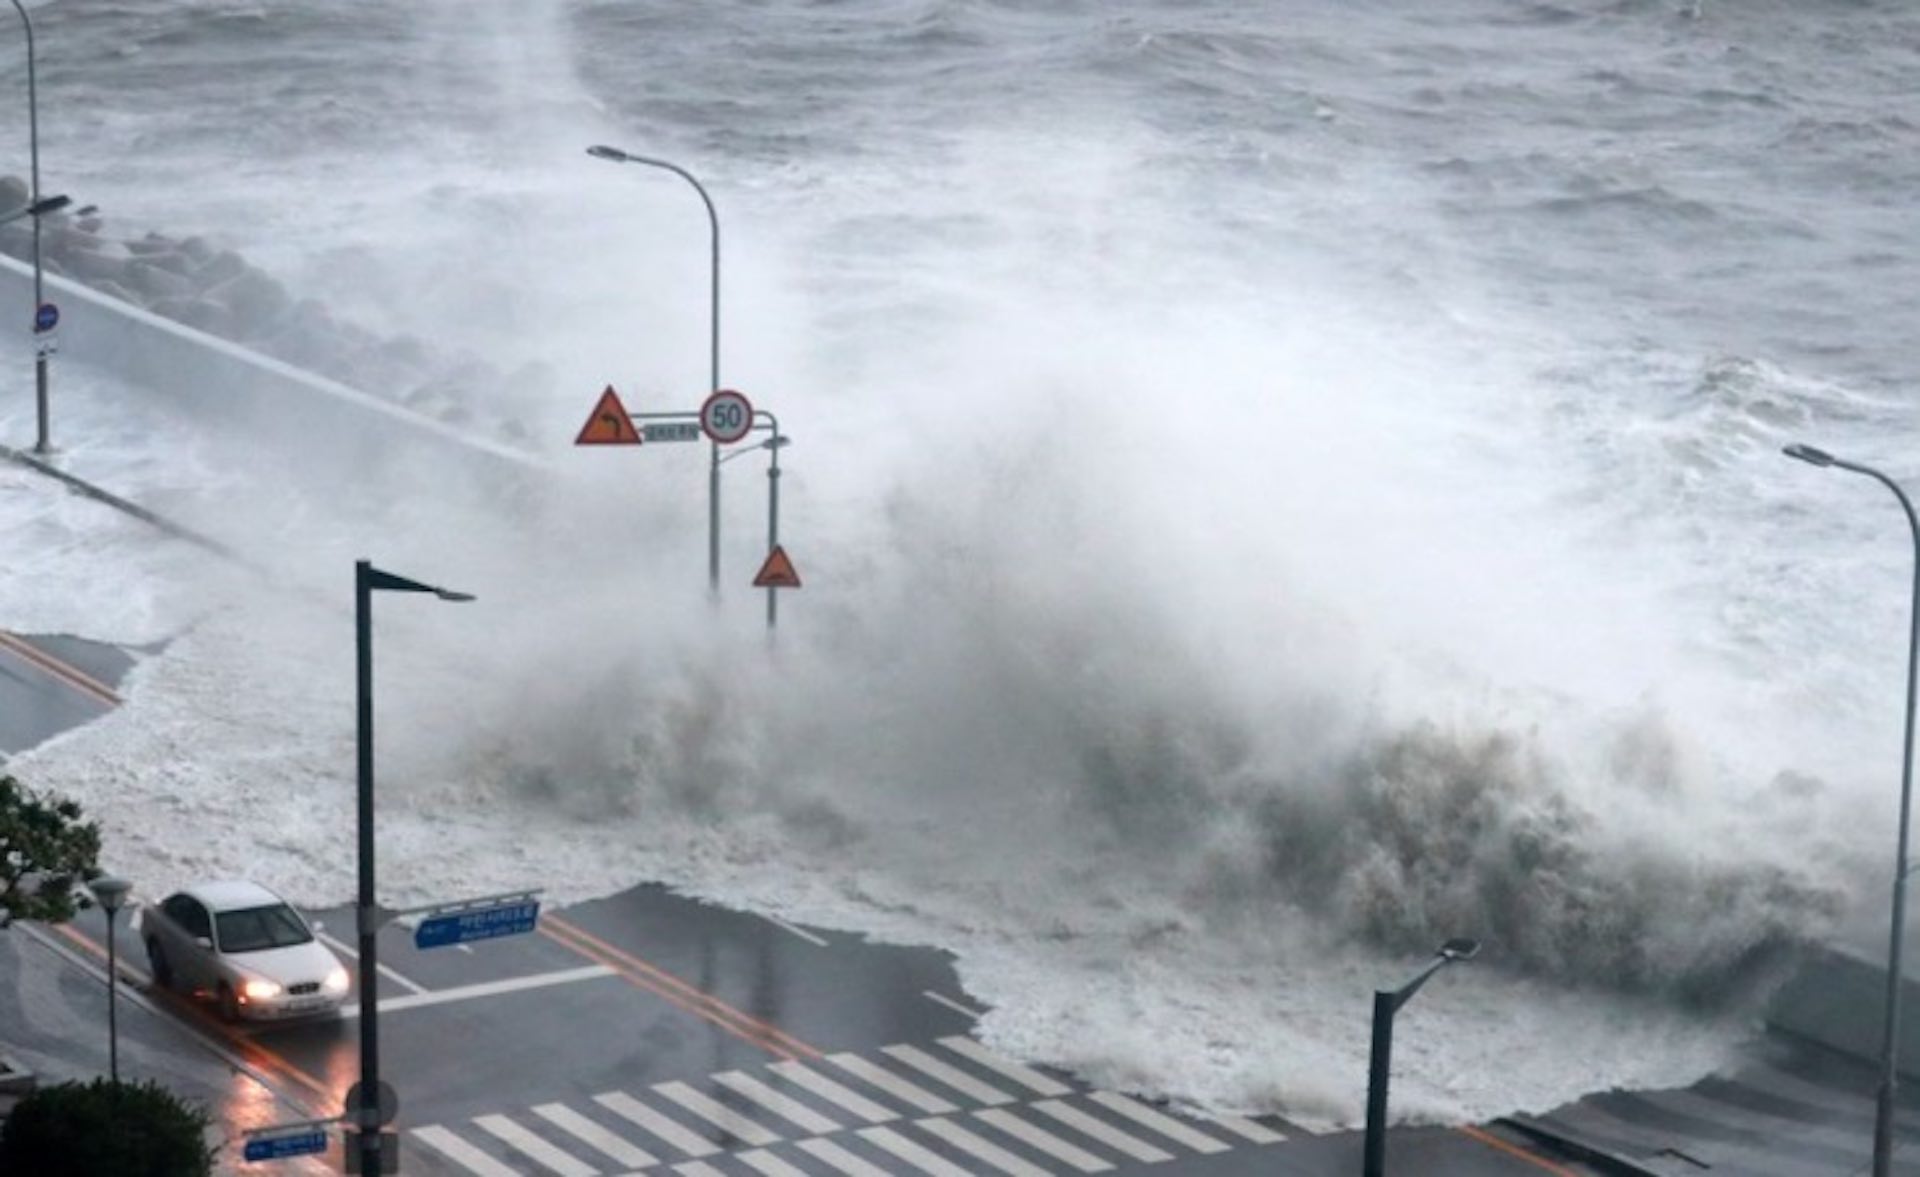 After leaving South Korea with winds and rain, Typhoon Hinnamnor leaves